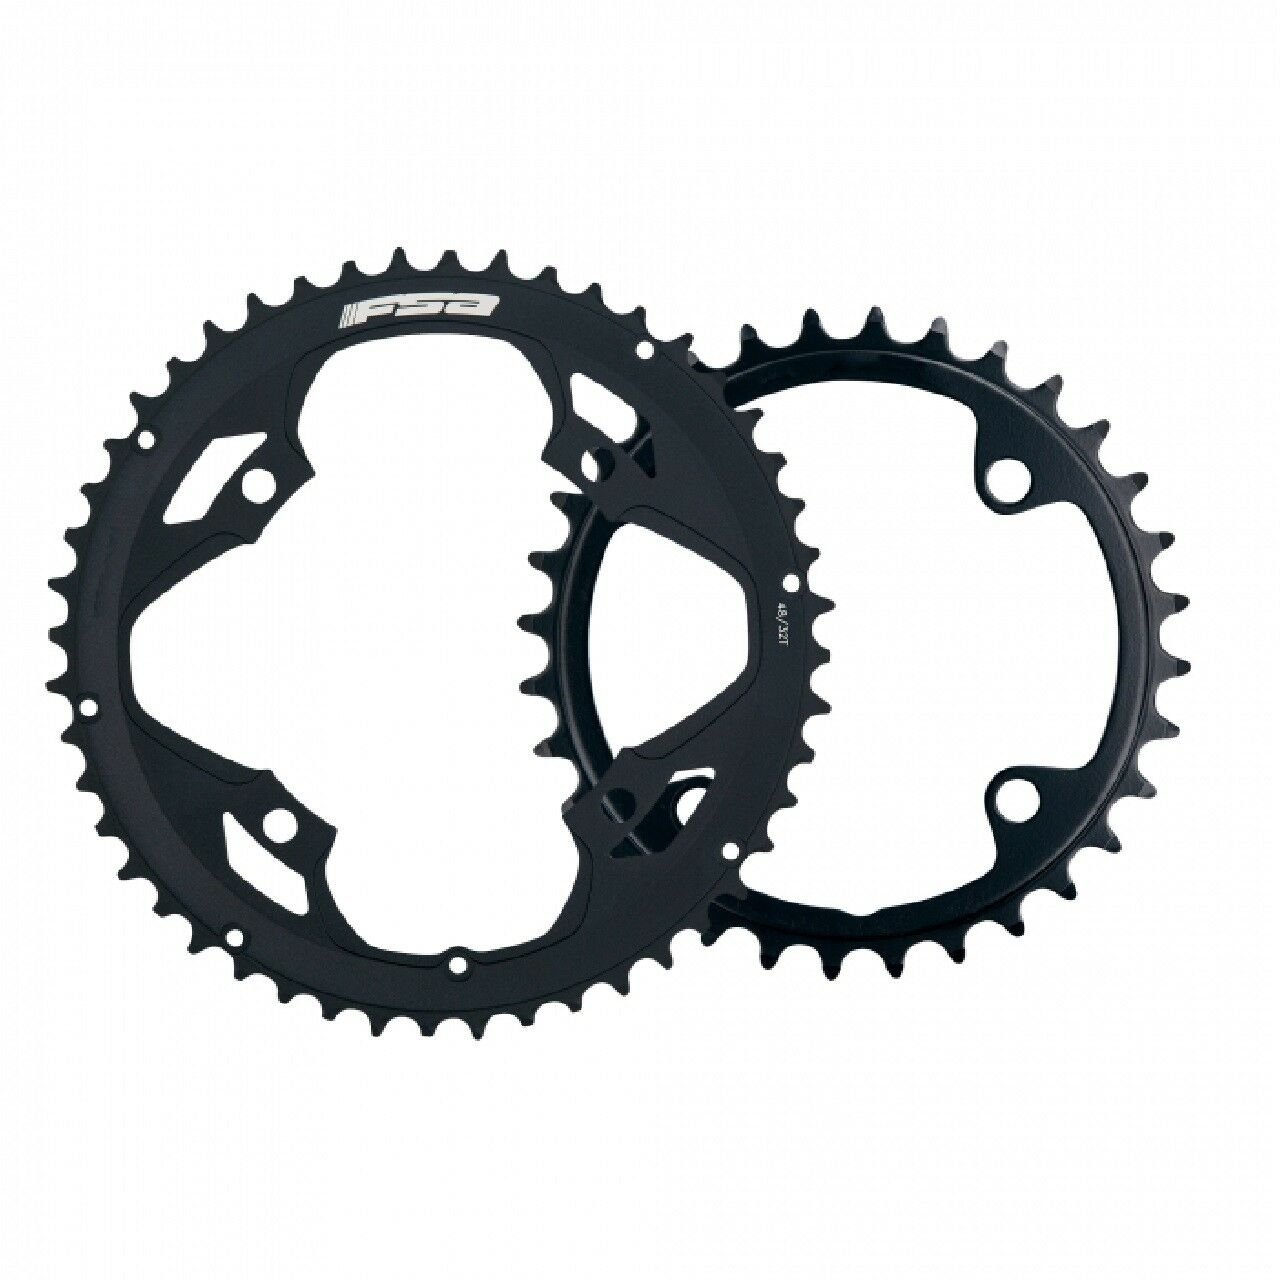 FSA OMEGA/VERO PRO REPLACEMENT CHAINRING 52T x 120 (one ring only)